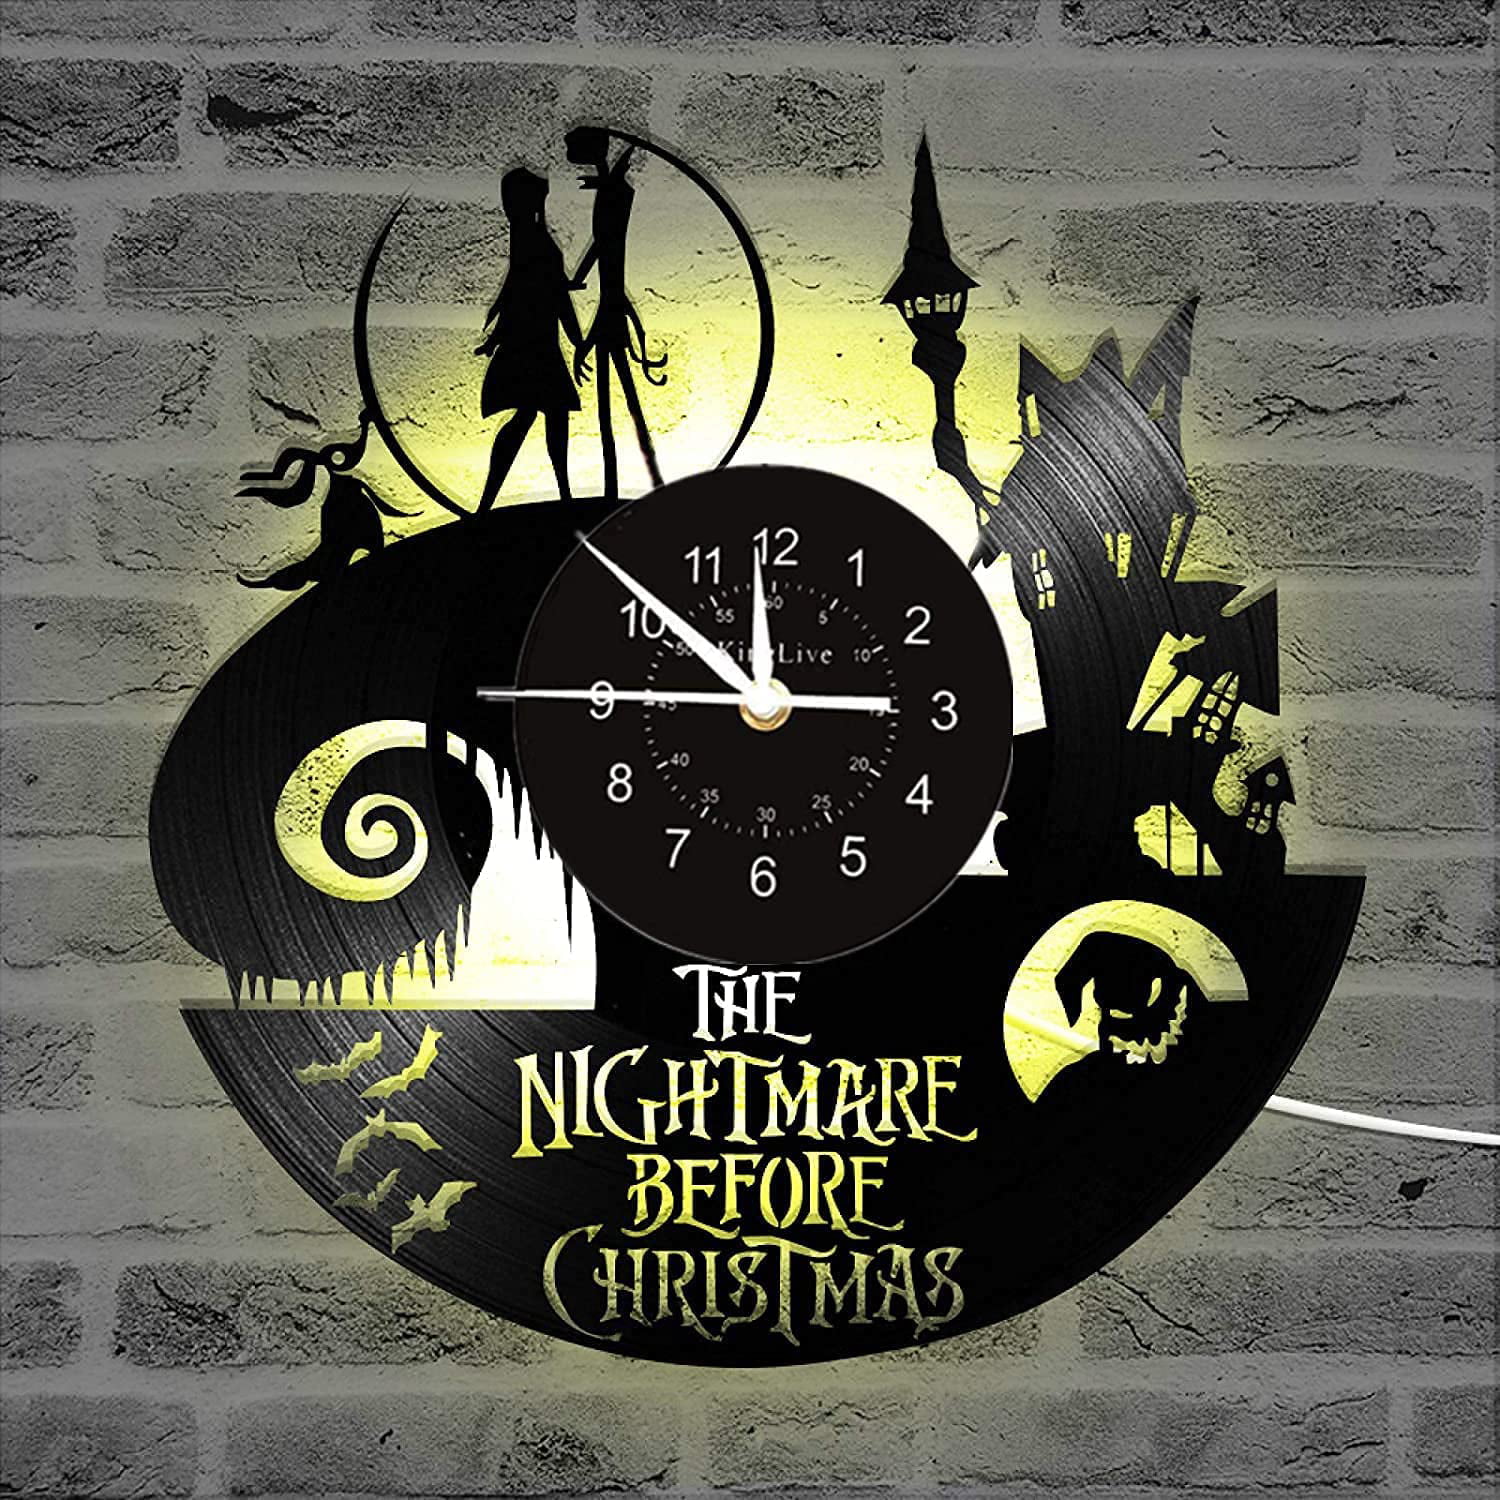 The Nightmare Before Christmas_Exclusive wall clock made of vinyl record_GIFT 